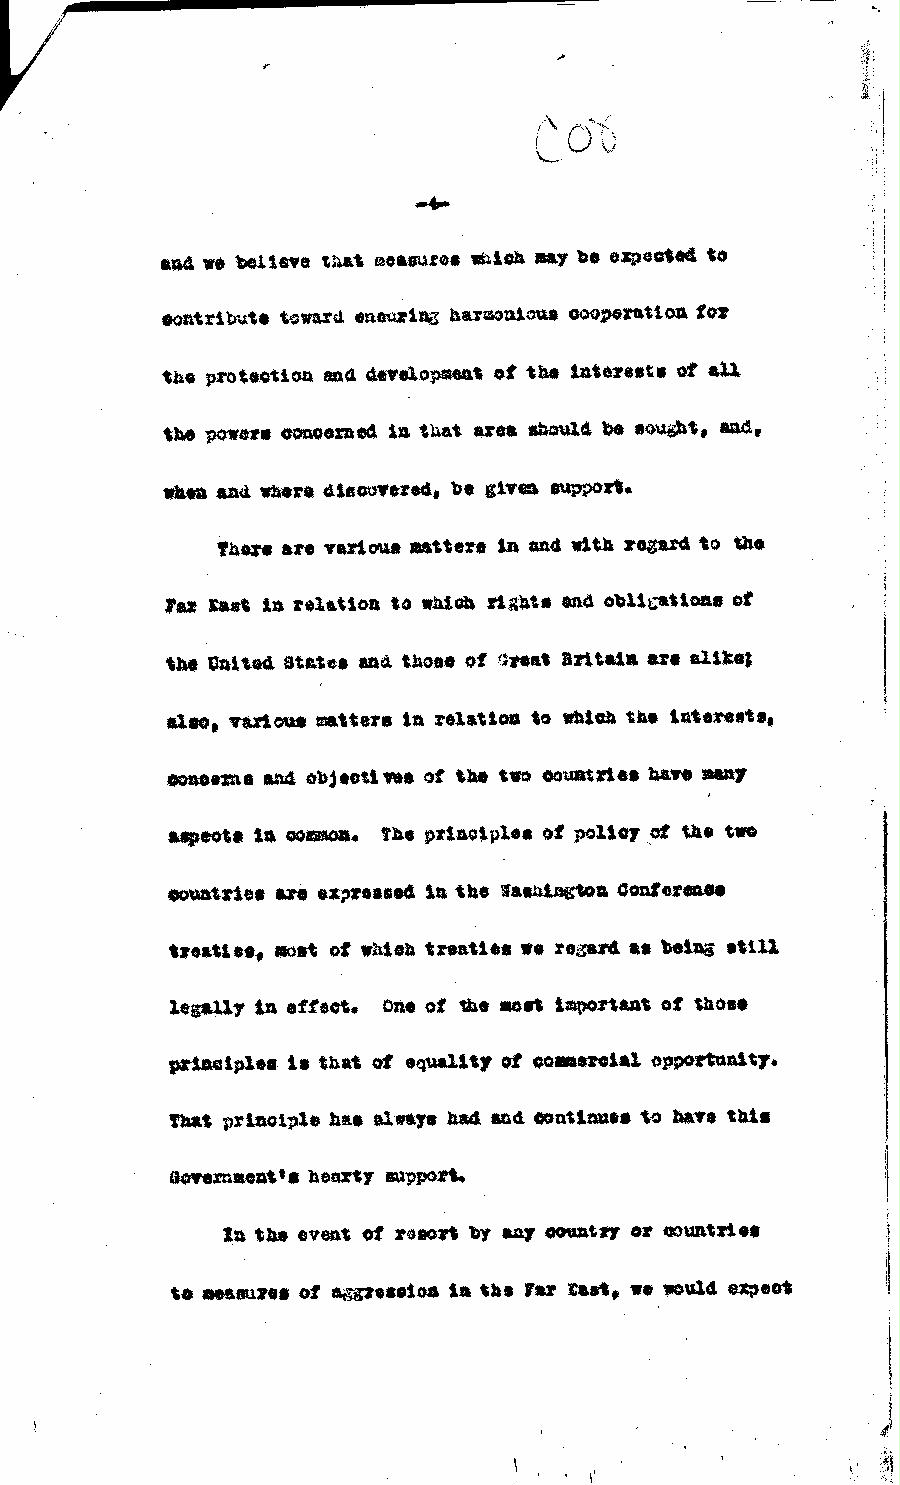 [a303c08.jpg] - Cont-memo from Dept. of State5/28/37